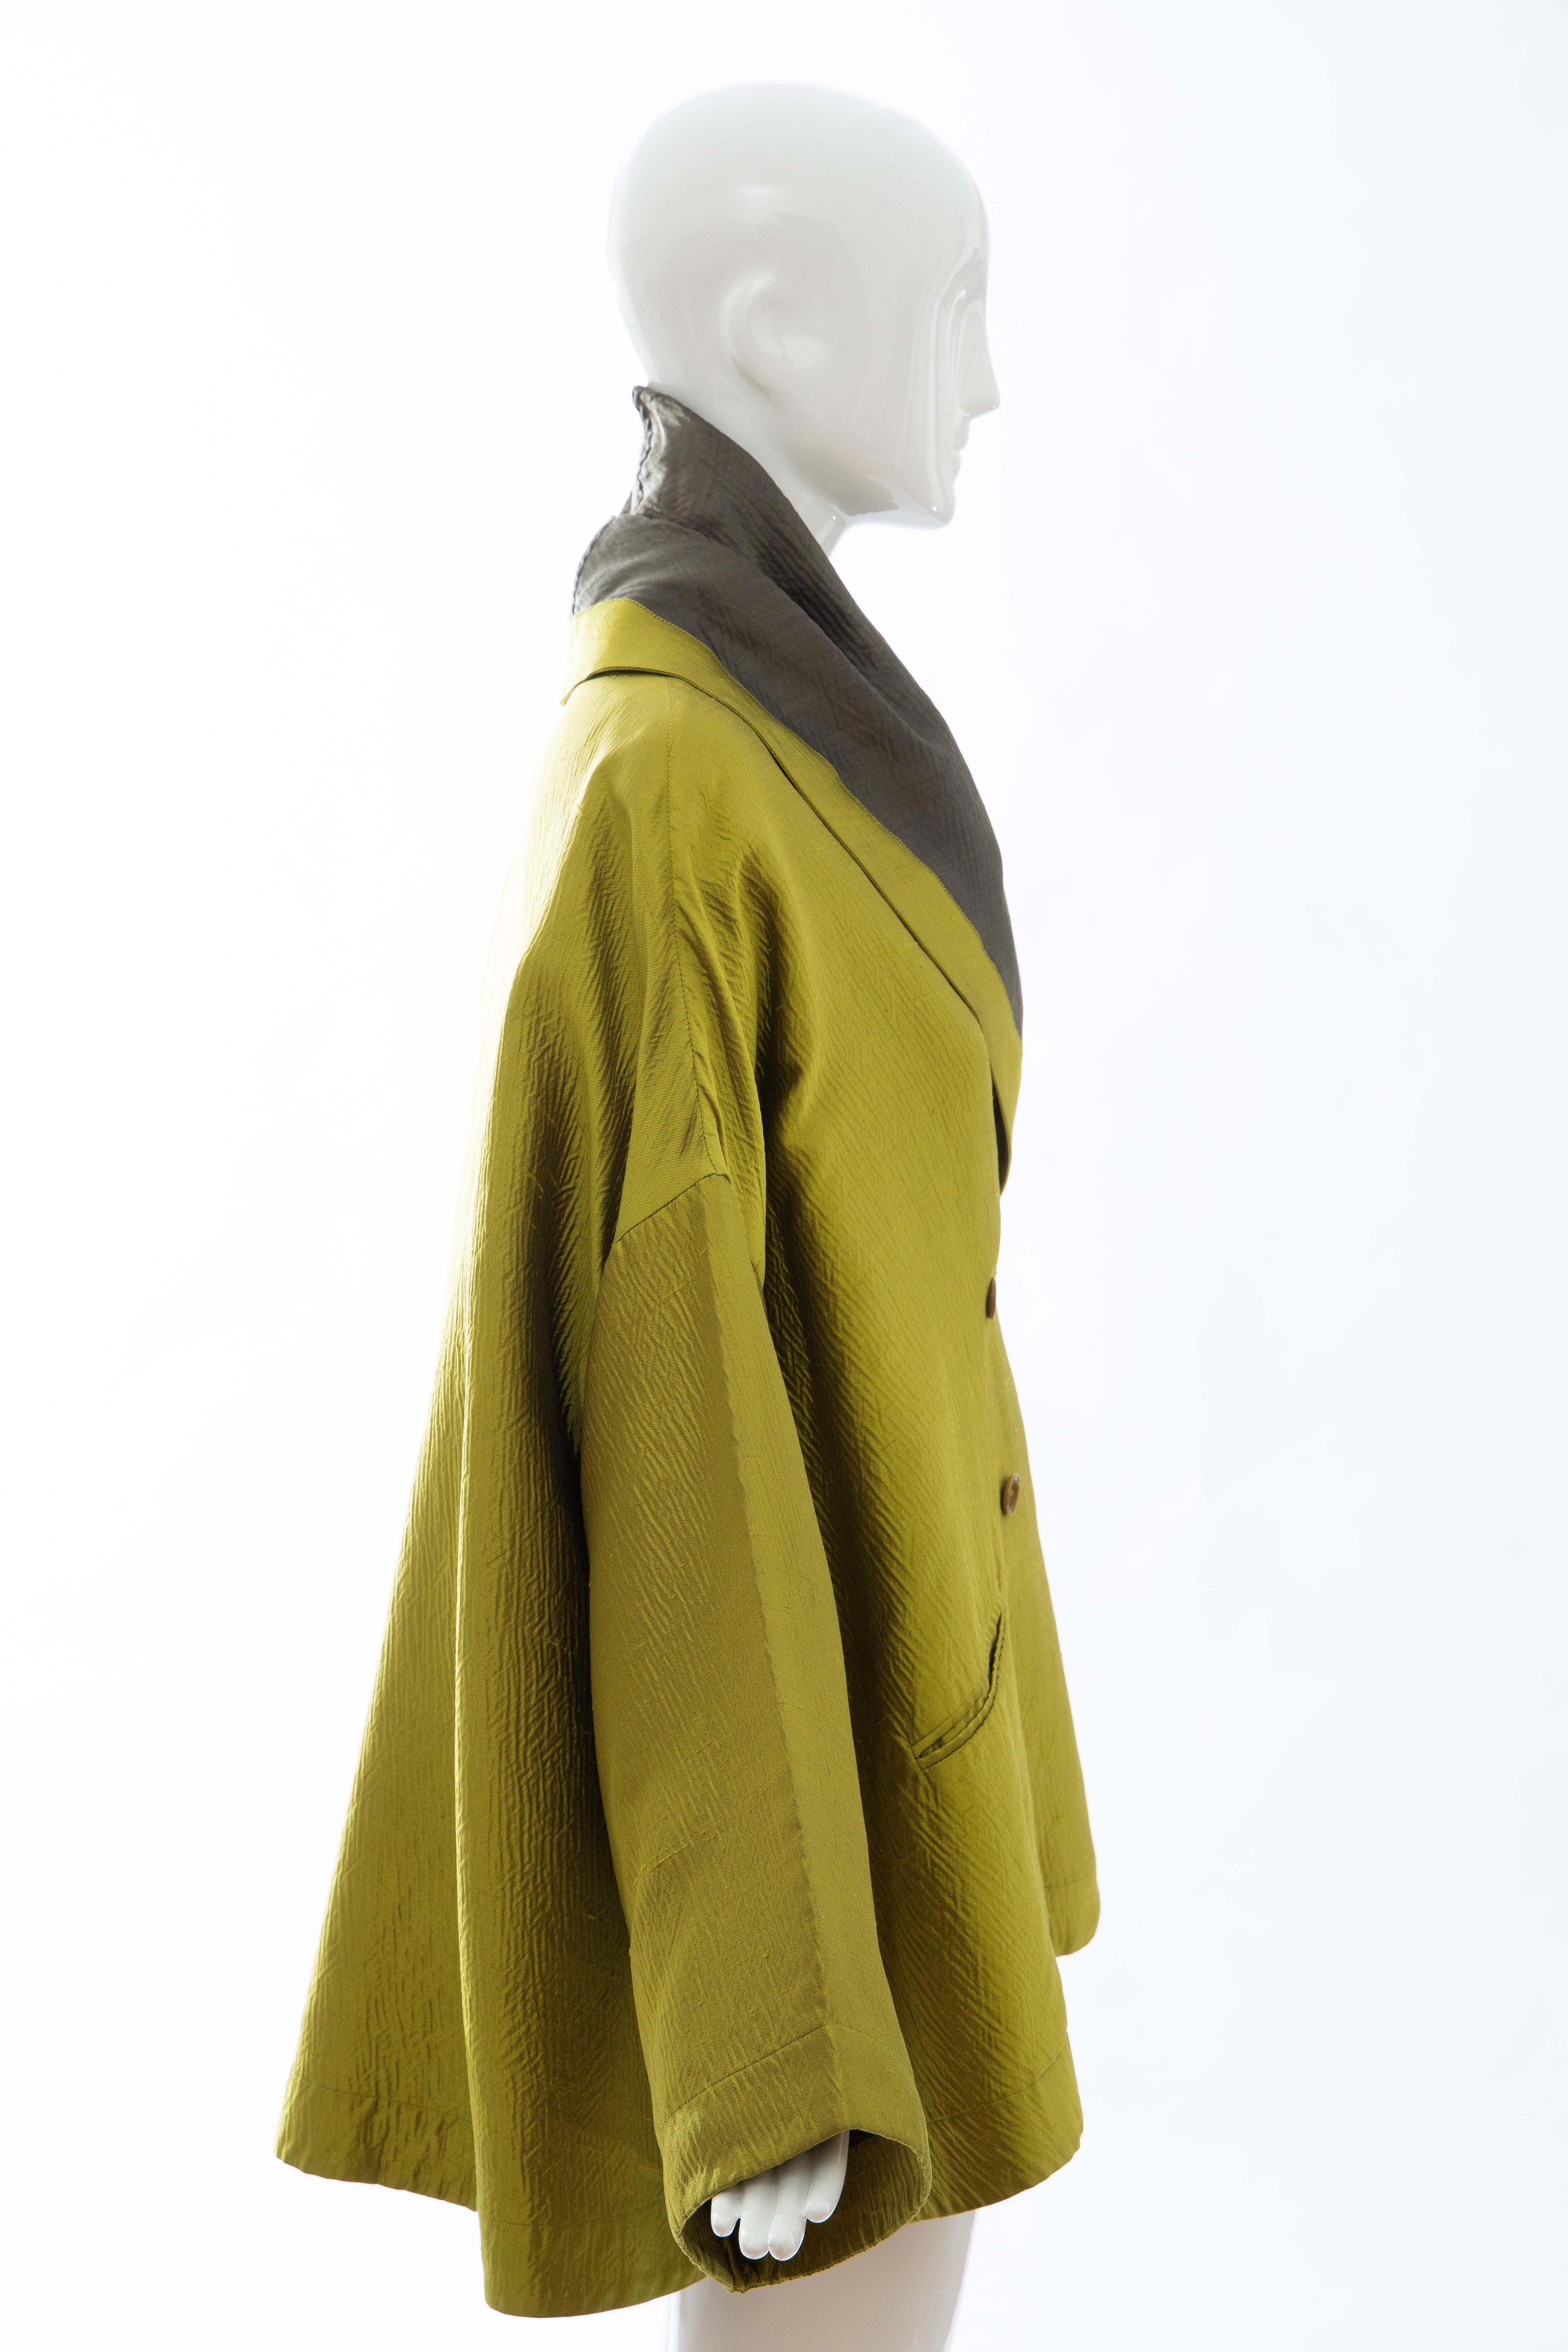 Romeo Gigli Runway Silk Cotton Chartreuse Green Evening Jacket, Fall 1991 In Excellent Condition In Cincinnati, OH